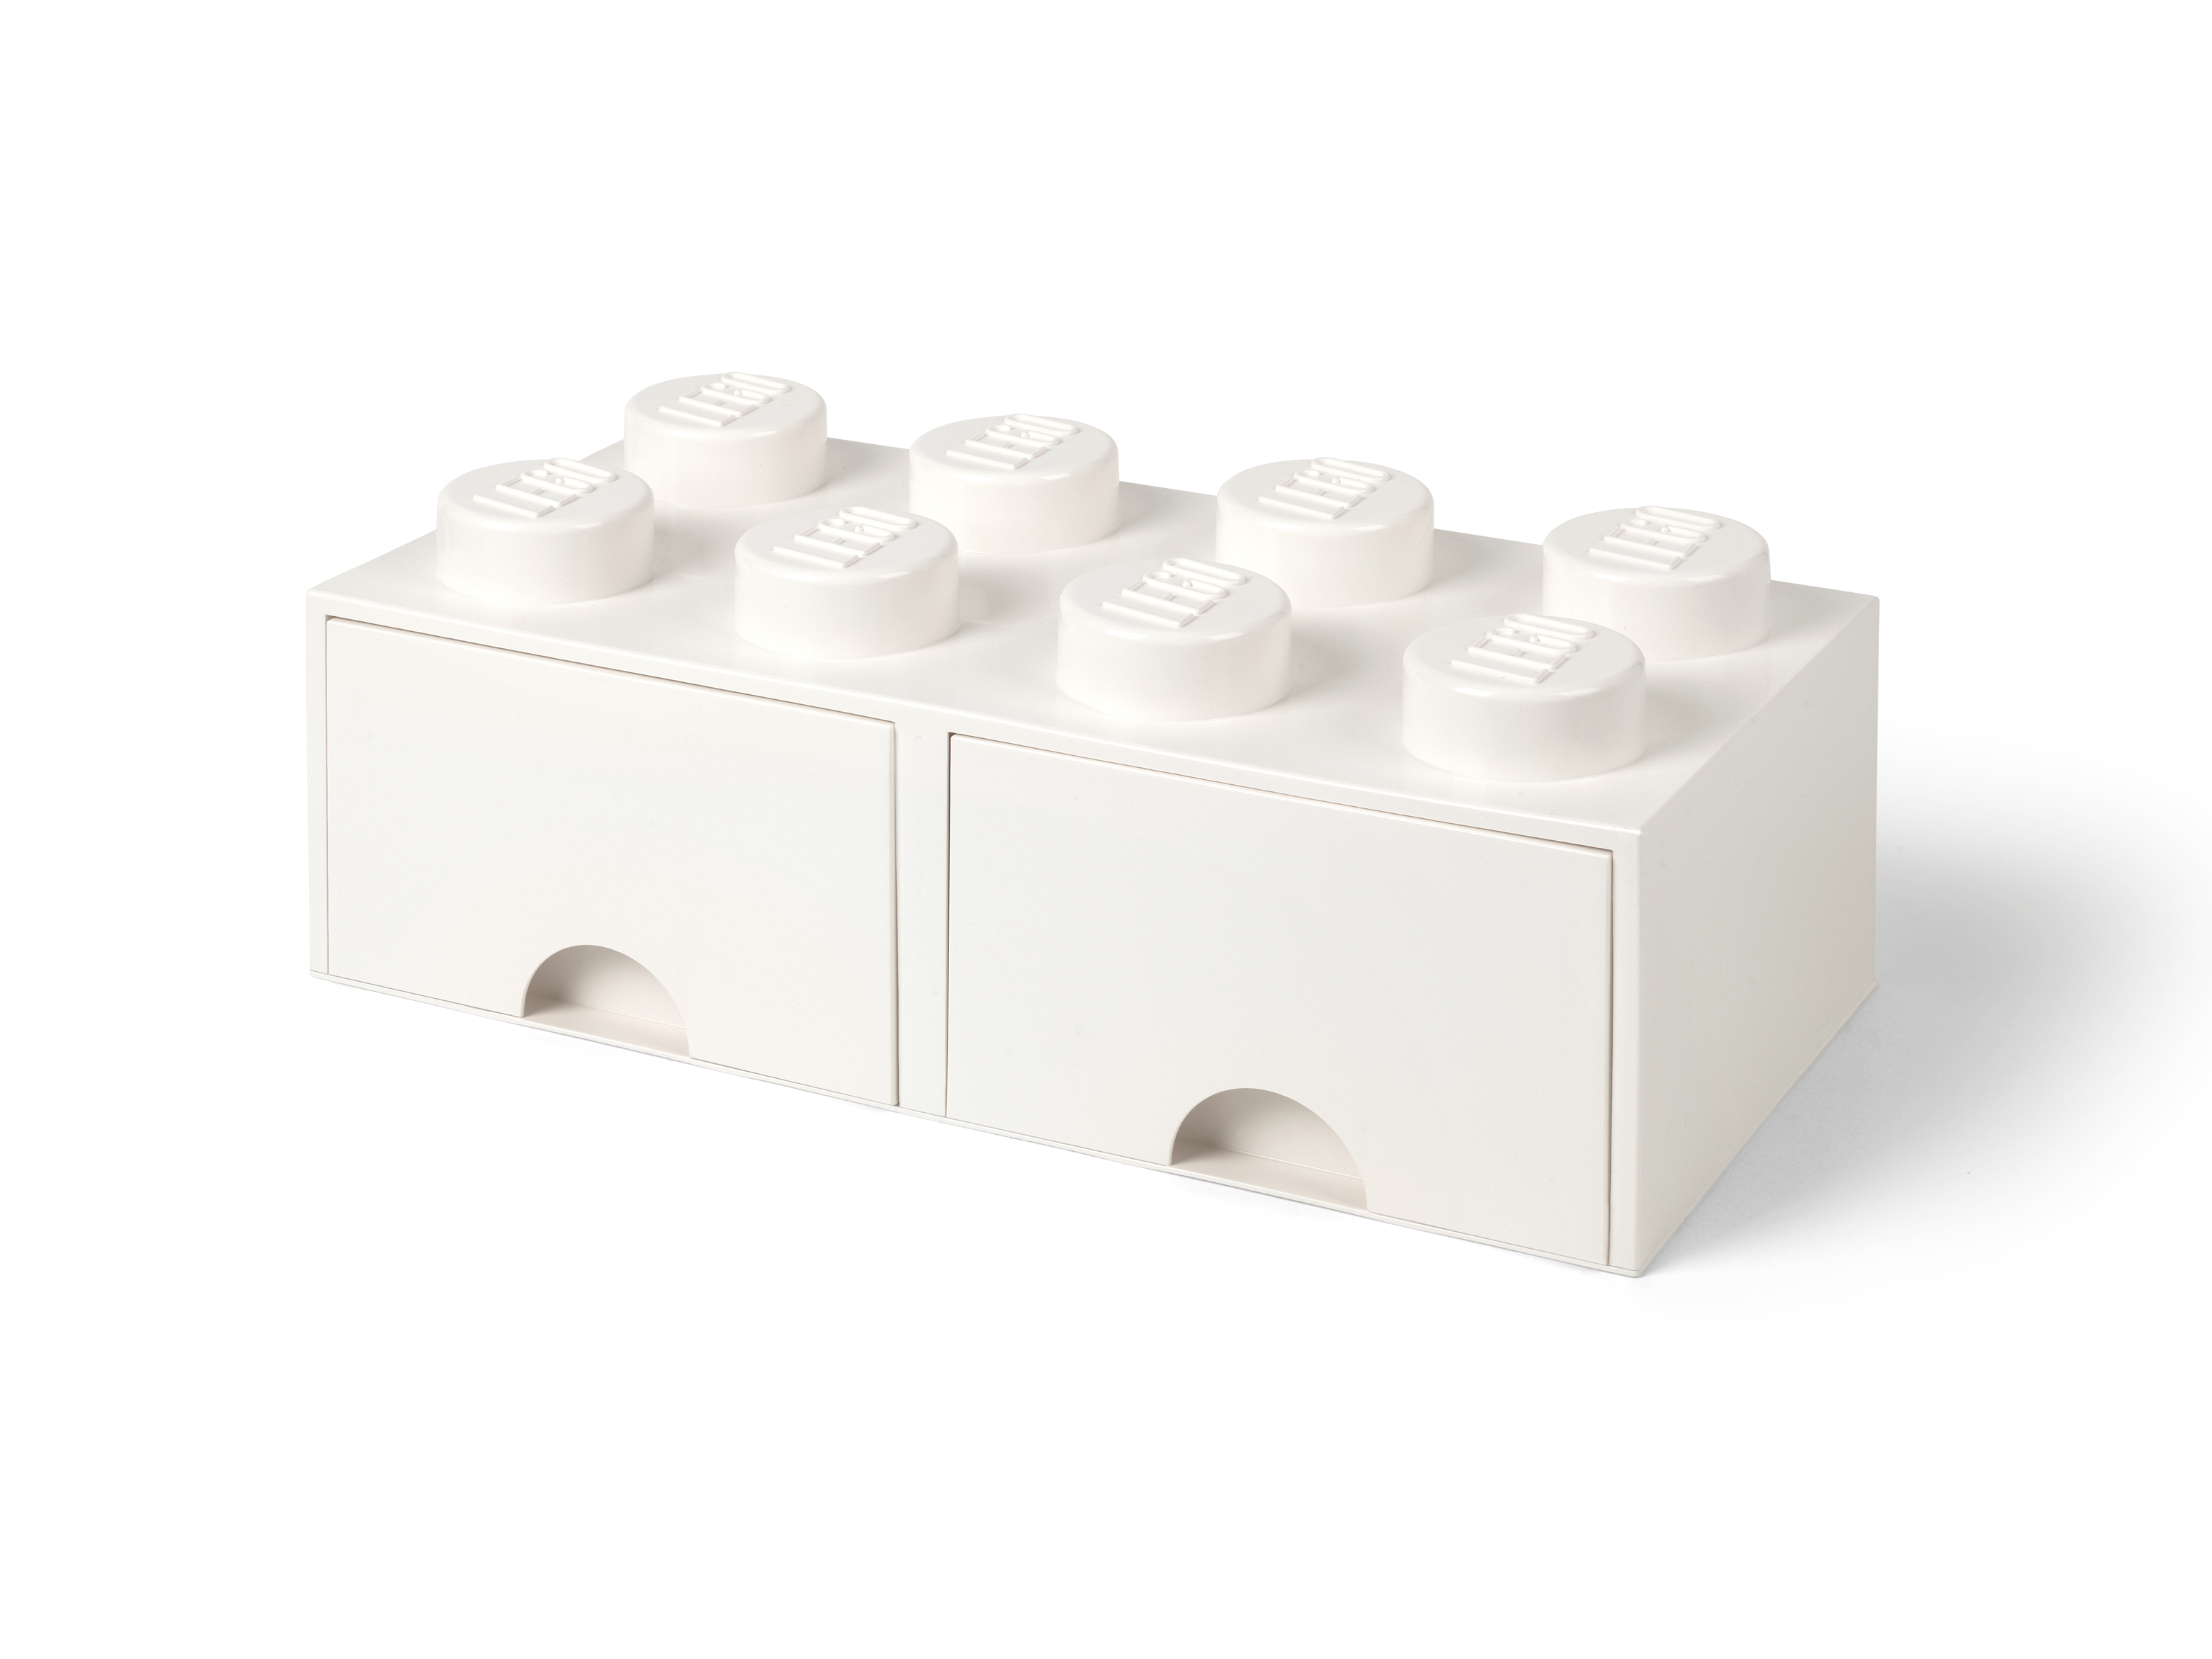 8-Stud Brick – White 5006209 | Buy online at the Official LEGO® Shop US